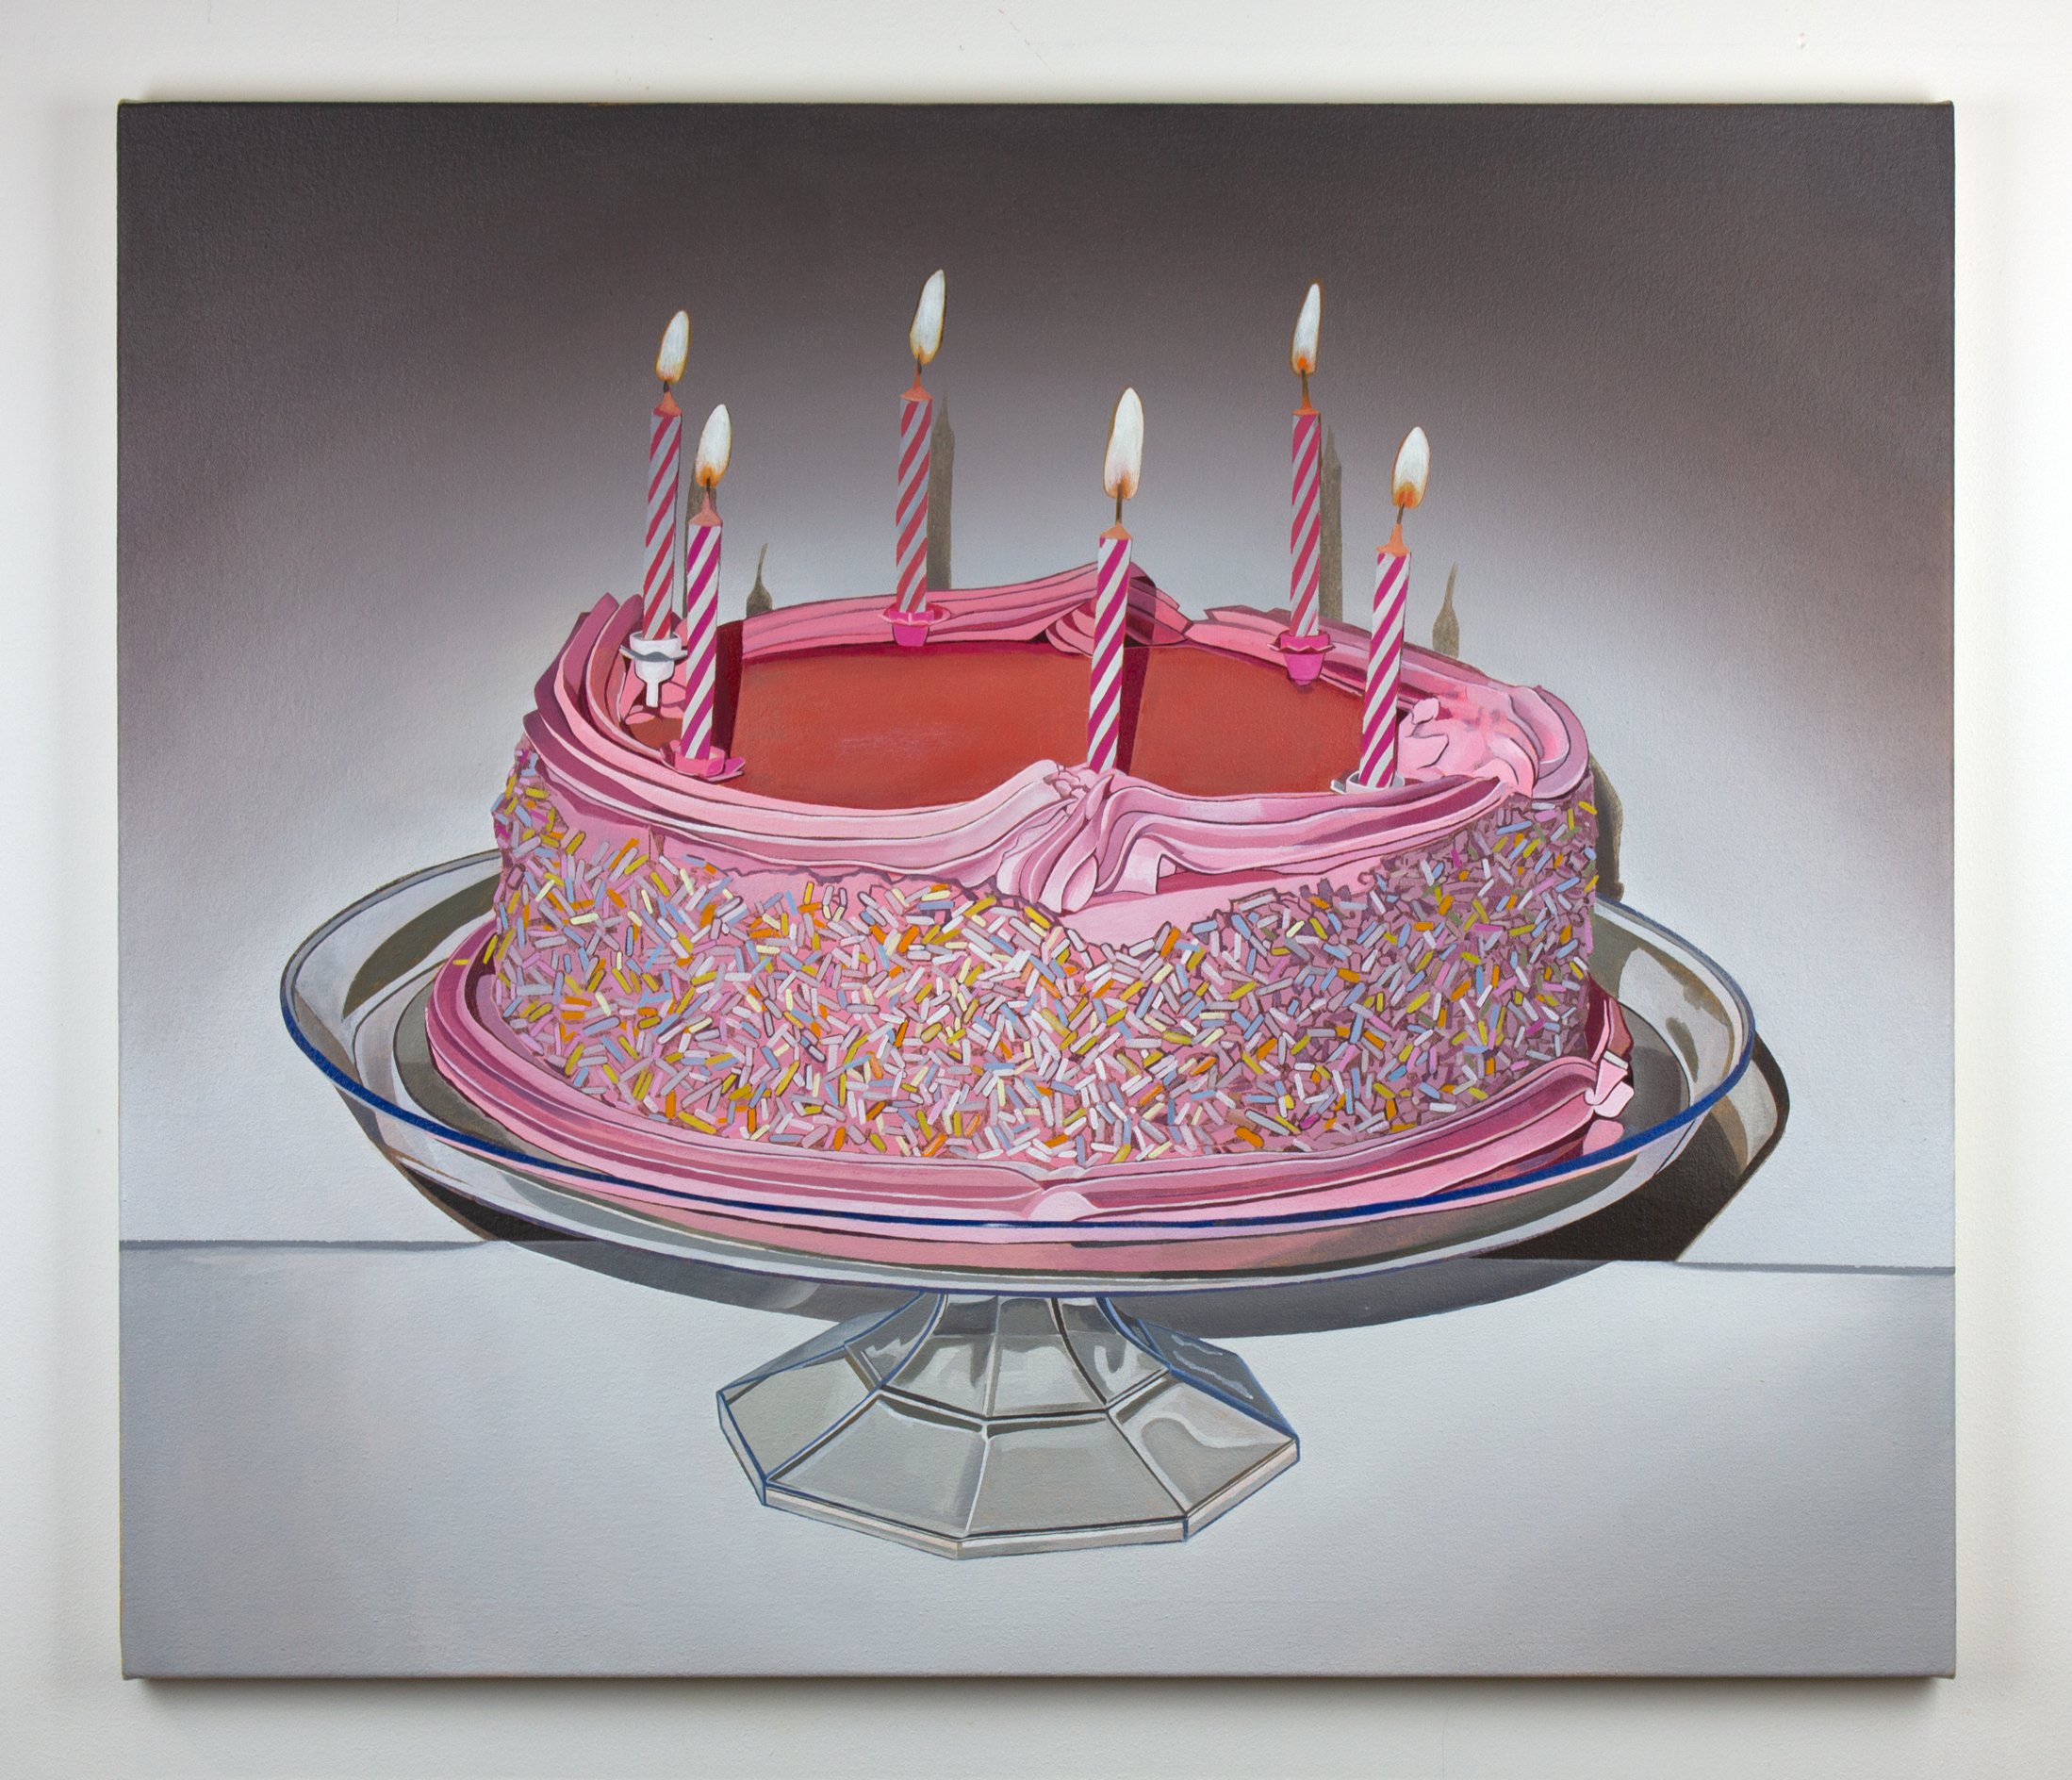  Birthday reminescence (2021)  Oil on canvas  60 x 70cm  Private Collection 